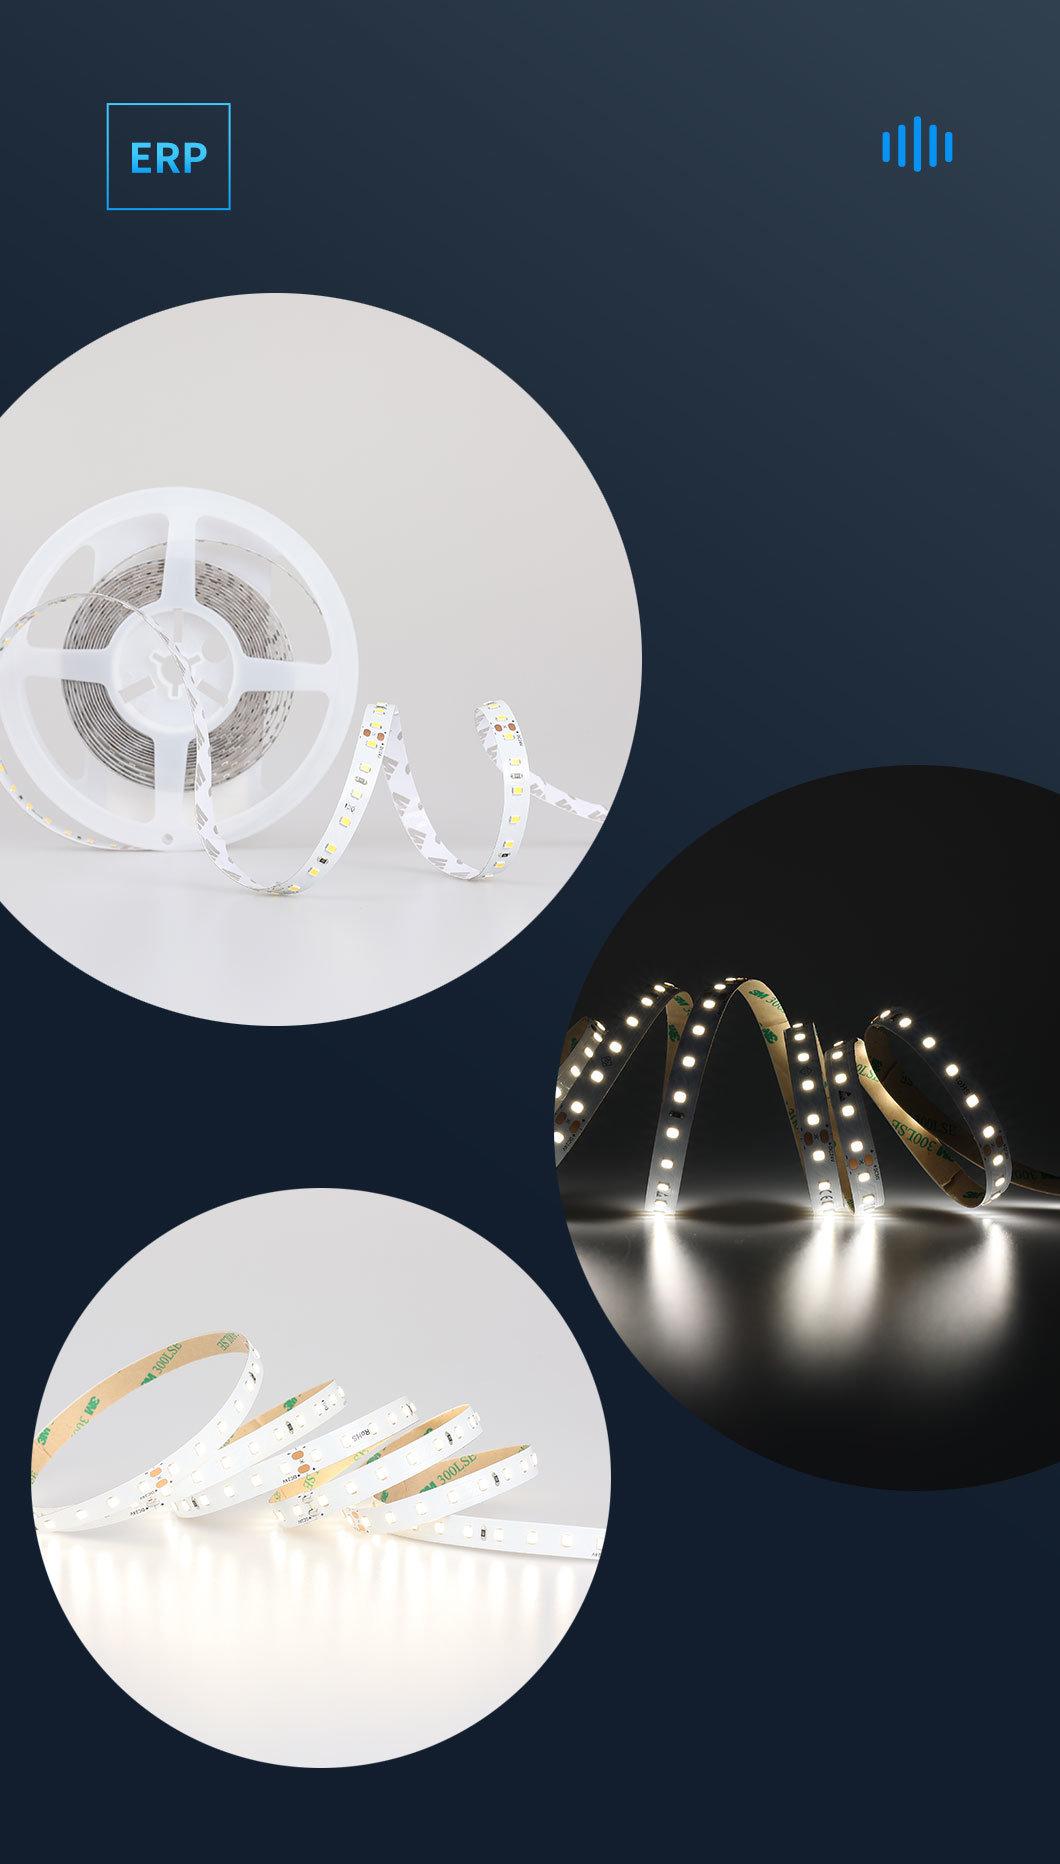 High CRI80 Cold White 6500K 10mm 5m Constant Voltage LED Light Strip with ERP Approval